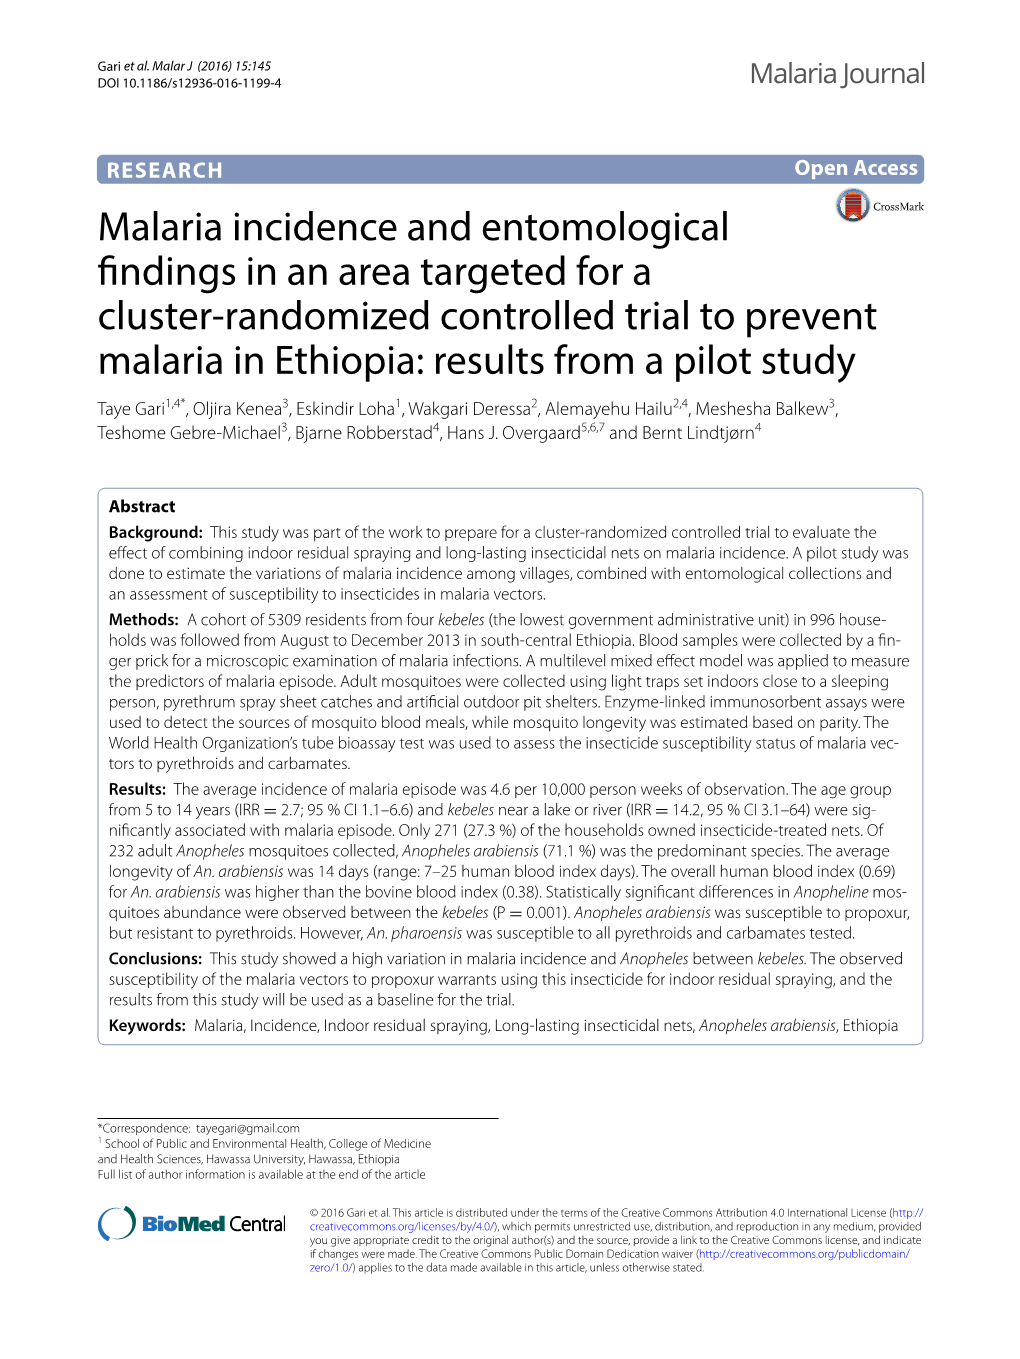 Malaria Incidence and Entomological Findings in an Area Targeted for A